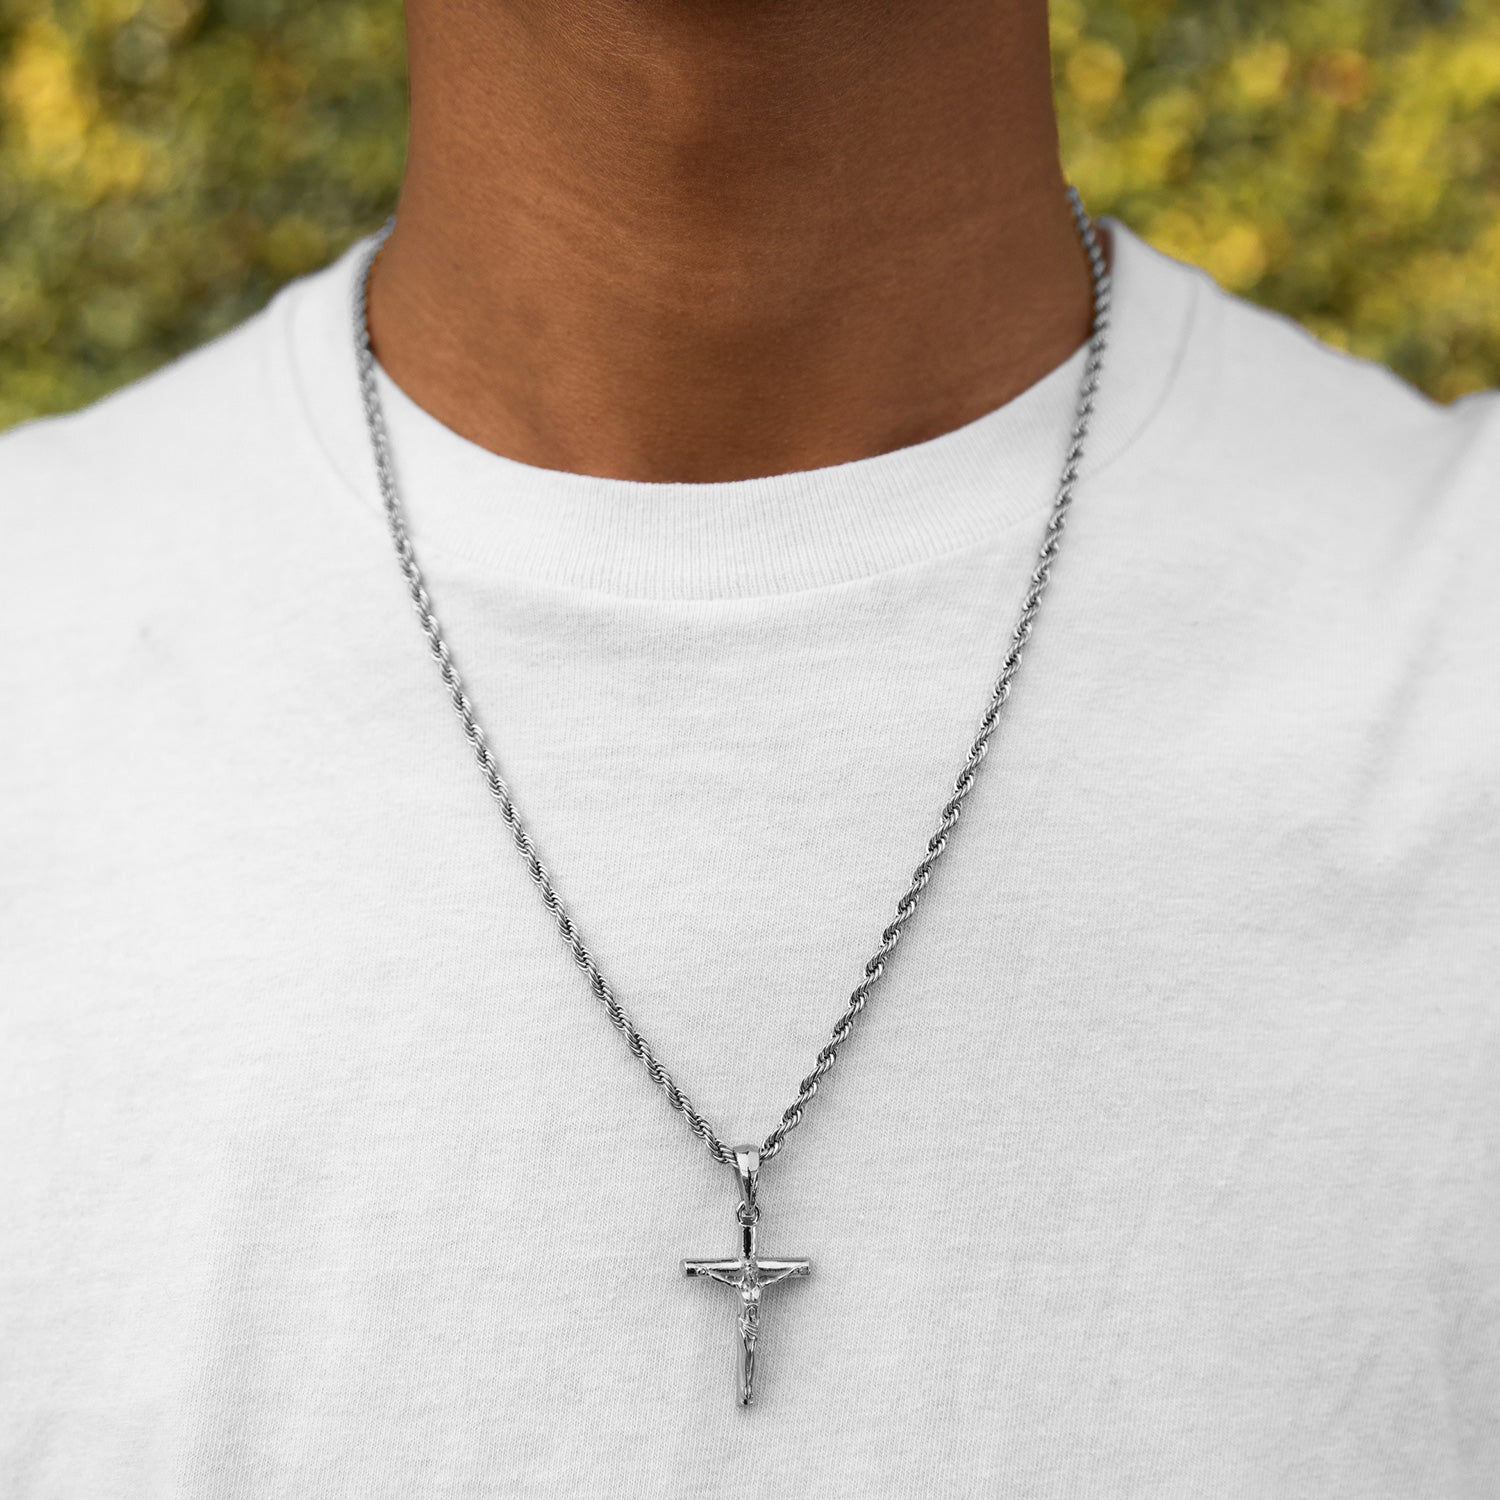 Buy Gold Cross Necklace for Men, Crucifix Necklace Chain, Mens Crucifix  Necklace, Crucifix Necklace Men, Mens Gold Cross Necklace Online in India -  Etsy